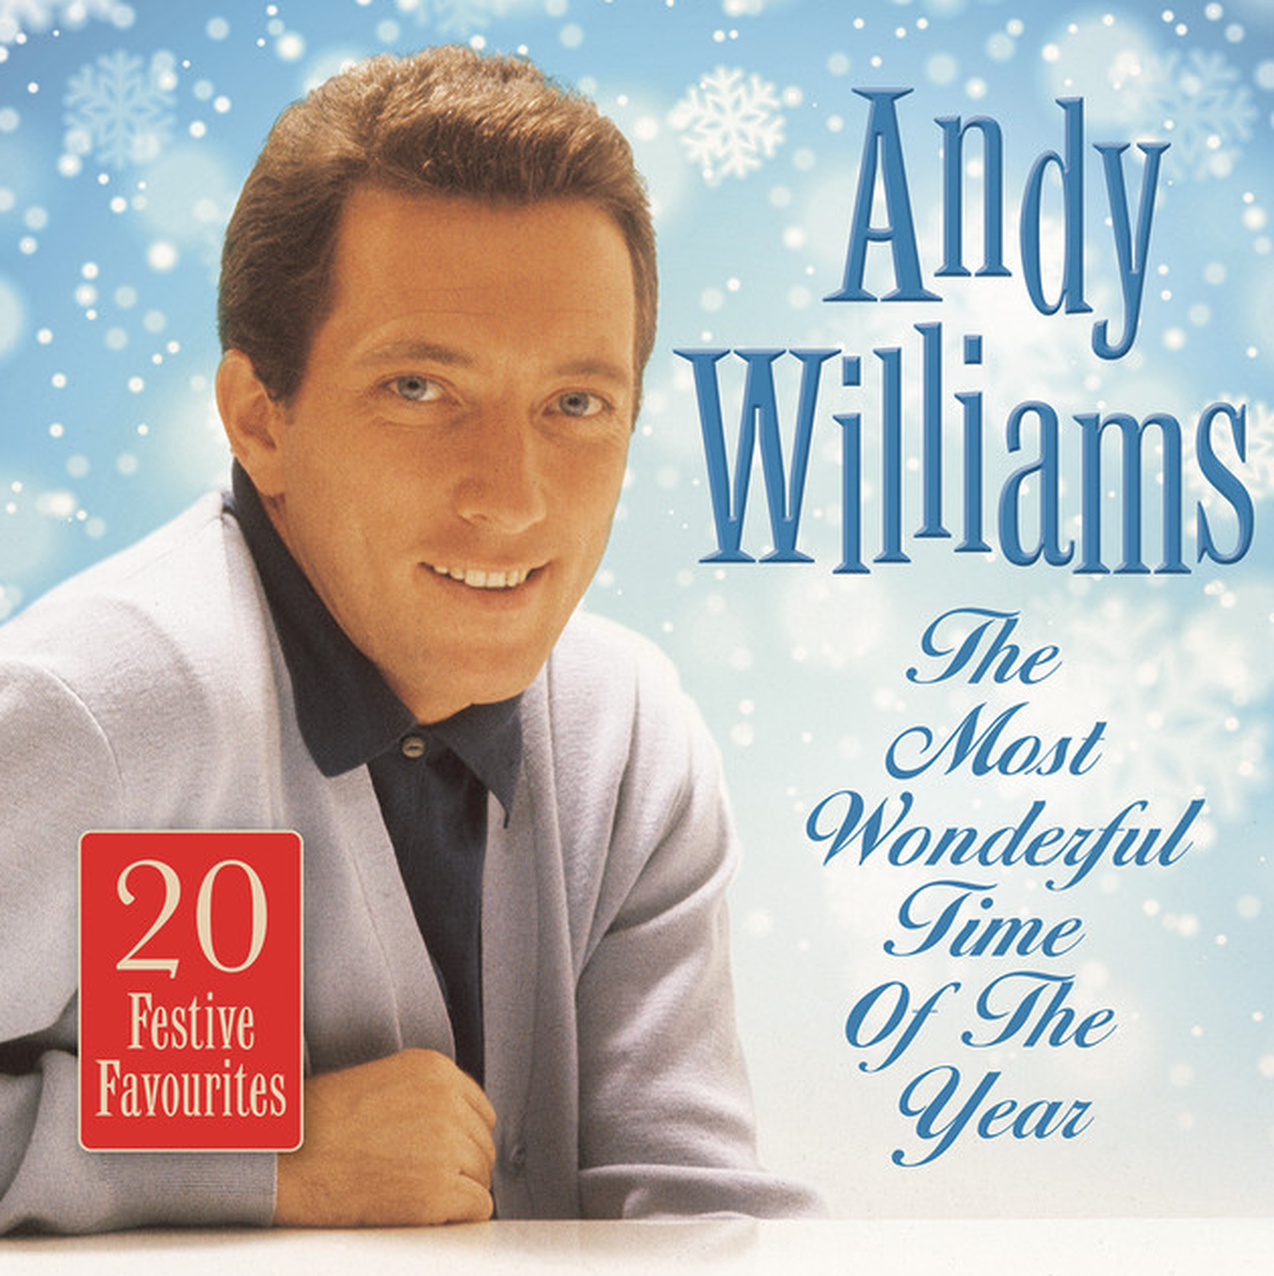 Most wonderful time of the year. It's the most wonderful time of the year Andy Williams. Andy Williams Christmas album. Andy Williams Christmas Hits. Andy Williams it's the most wonderful time of the year Lyrics.